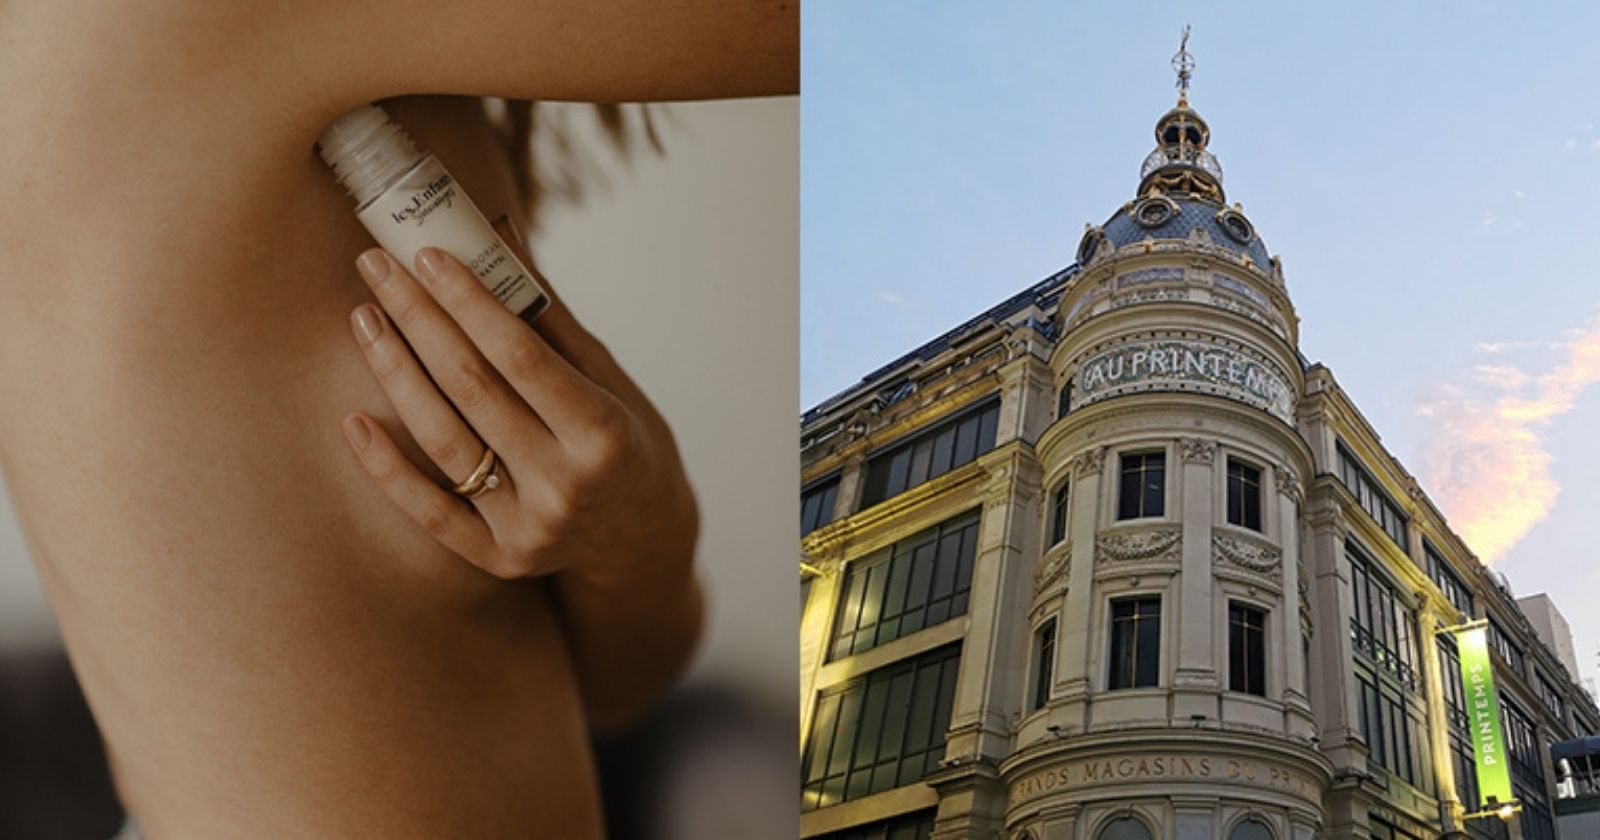 Organic, vegan and waste-free, these sustainable deodorants come out of Printemps Haussmann